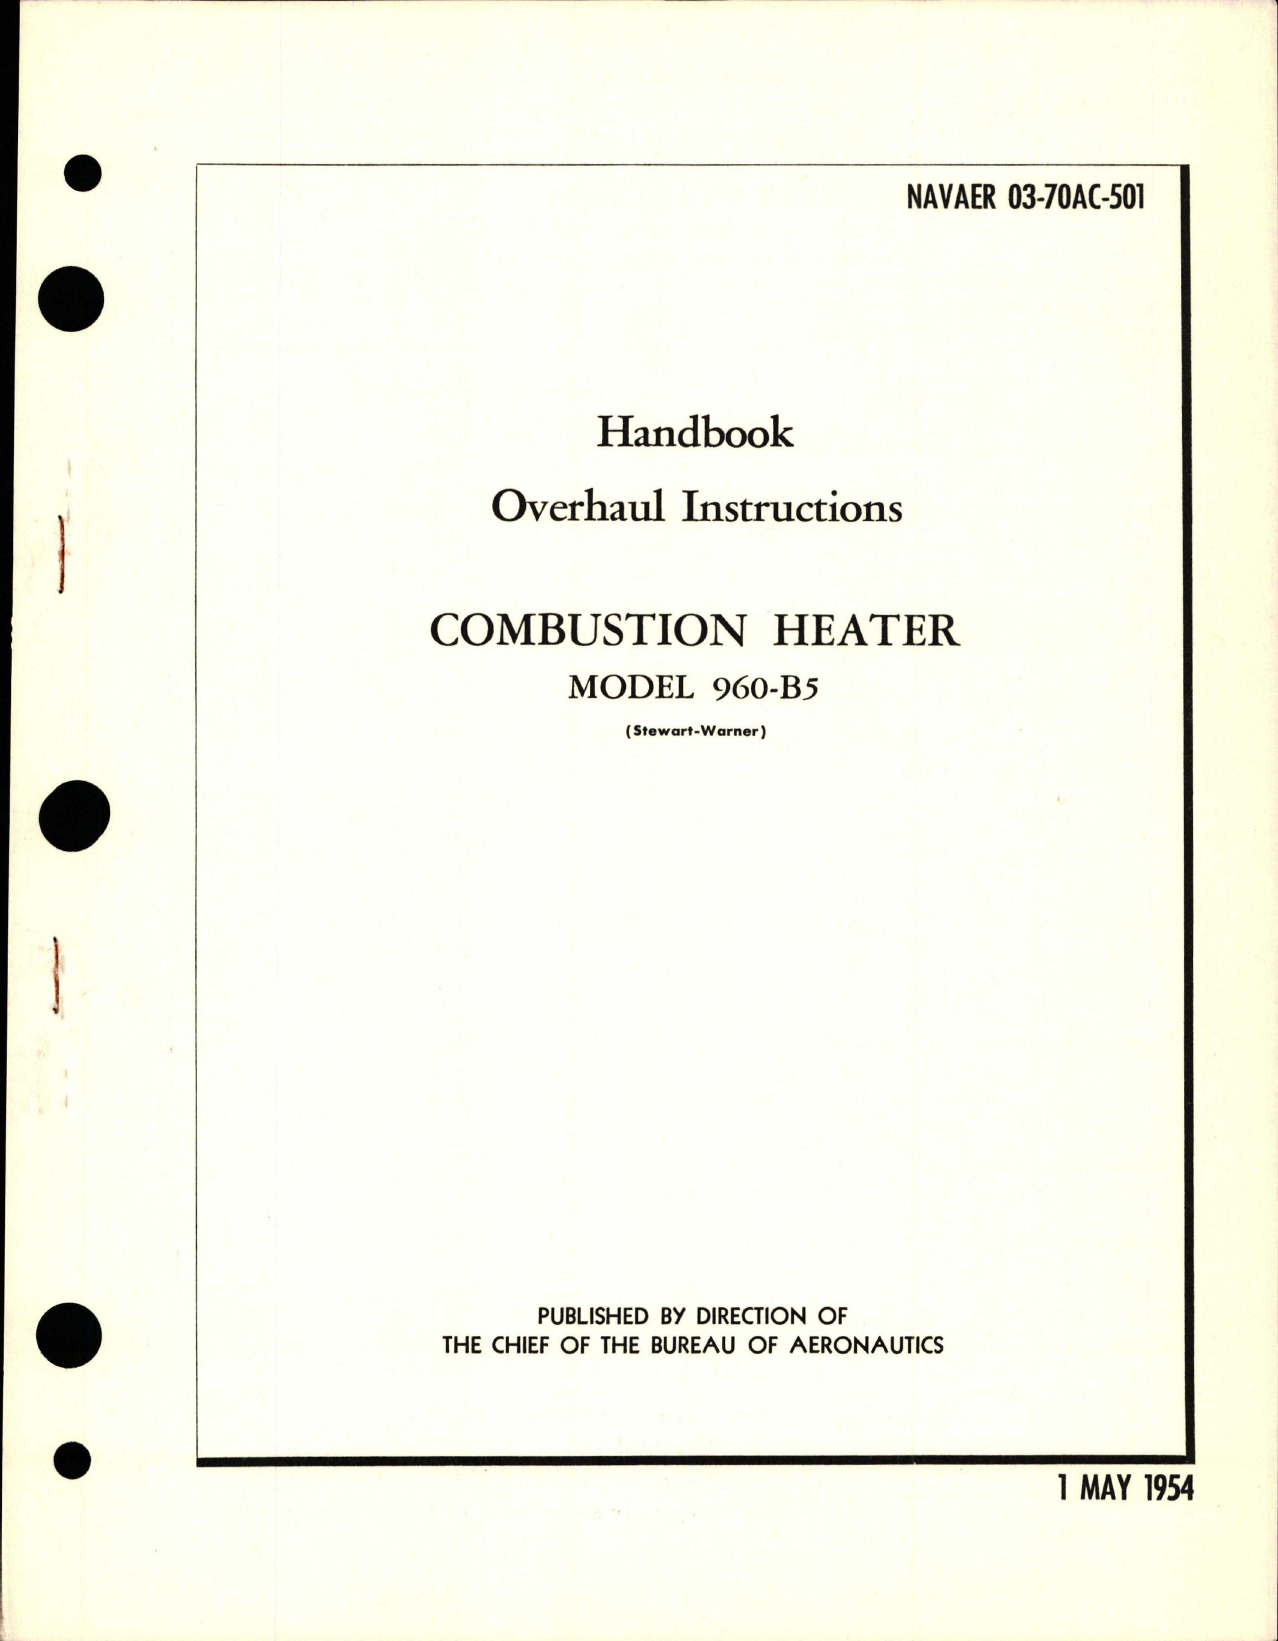 Sample page 1 from AirCorps Library document: Overhaul Instructions for Combustion Heater - Model 960-B5